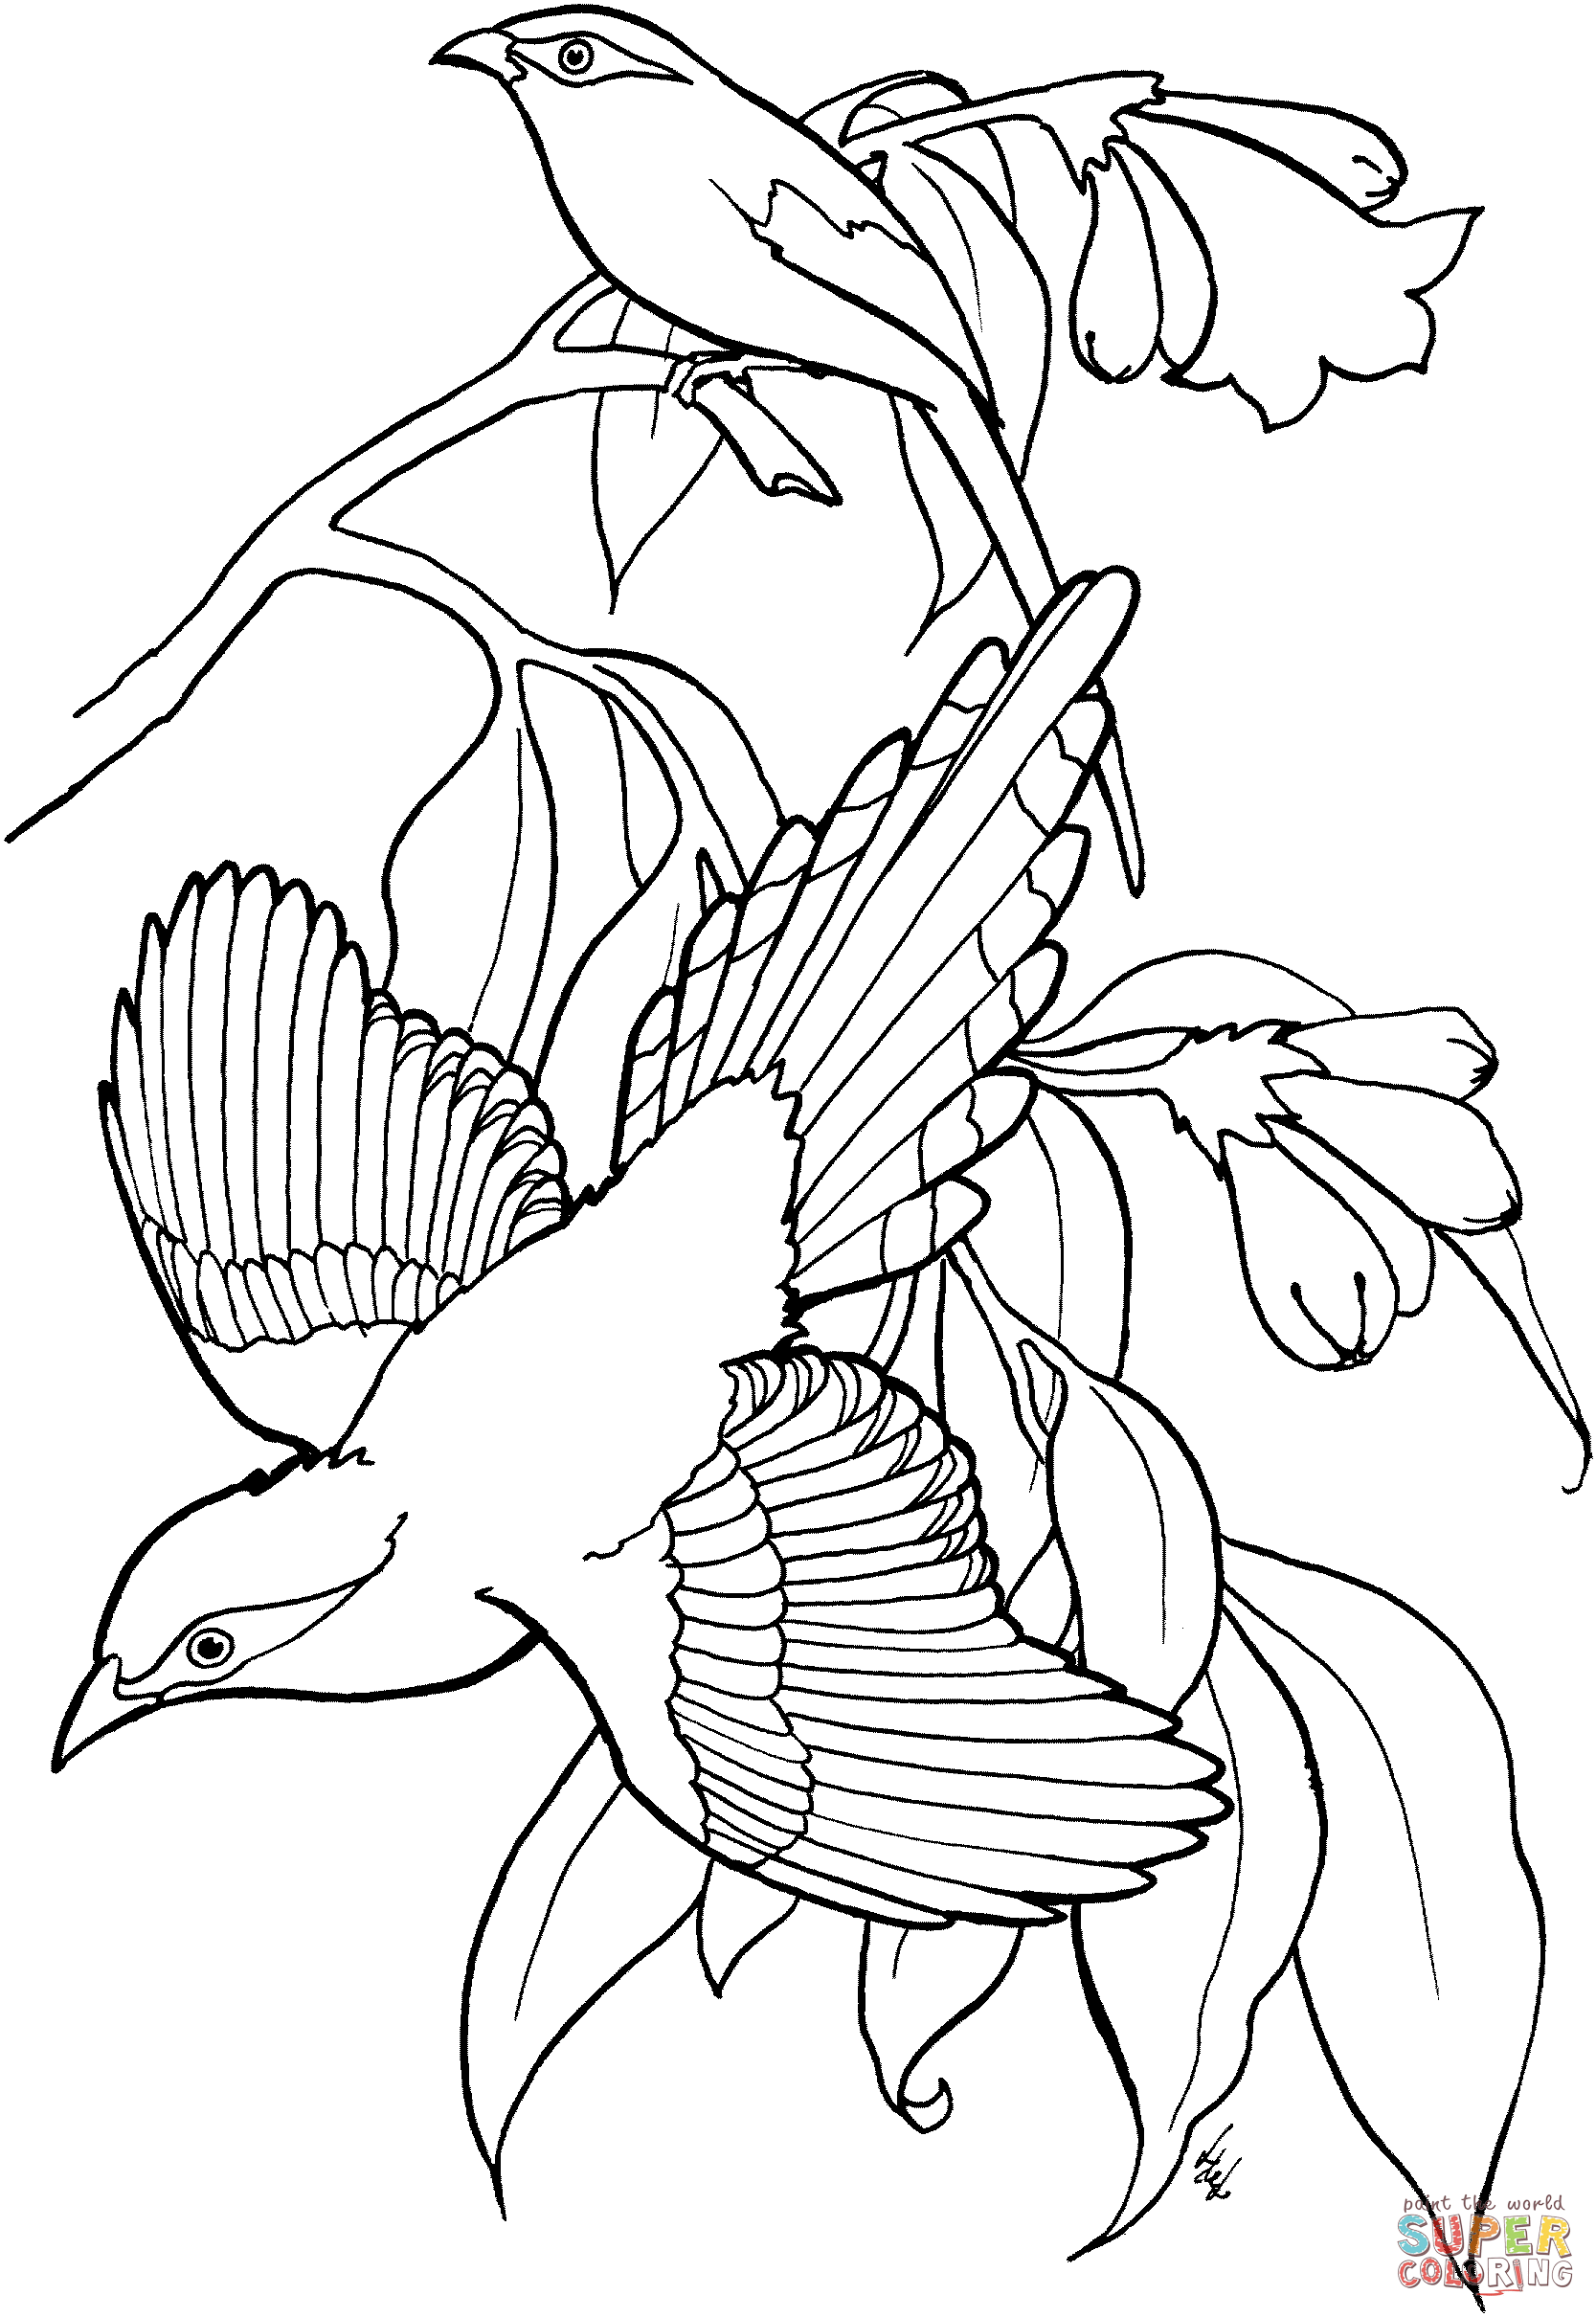 Green Magpies coloring page | Free Printable Coloring Pages